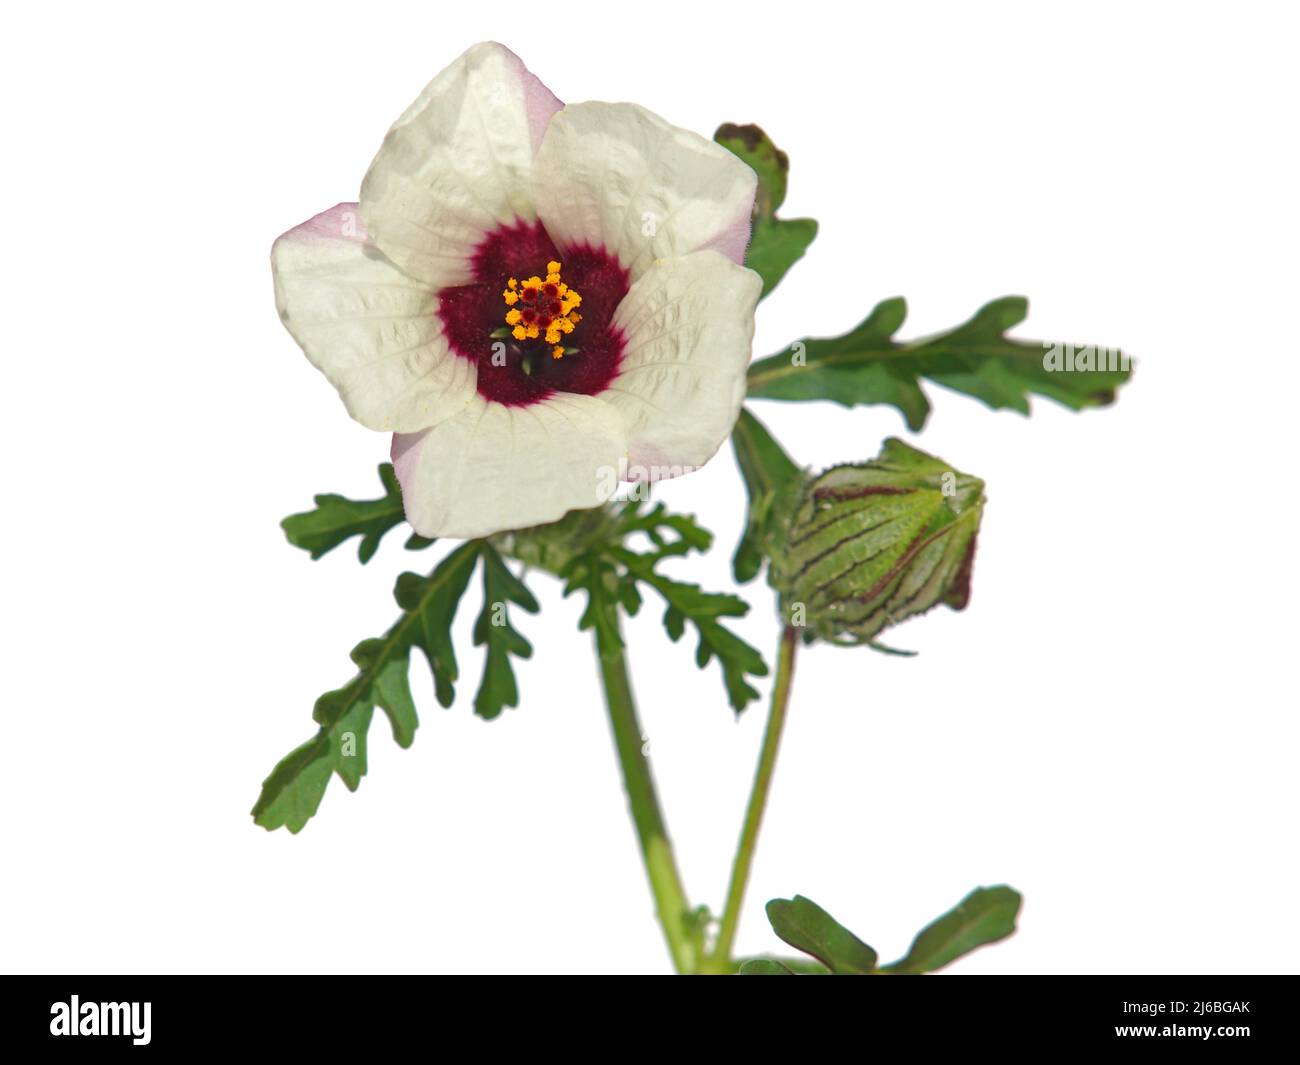 Flower-of-an-hour or bladder hibiscus white flower, Hibiscus trionum Stock Photo